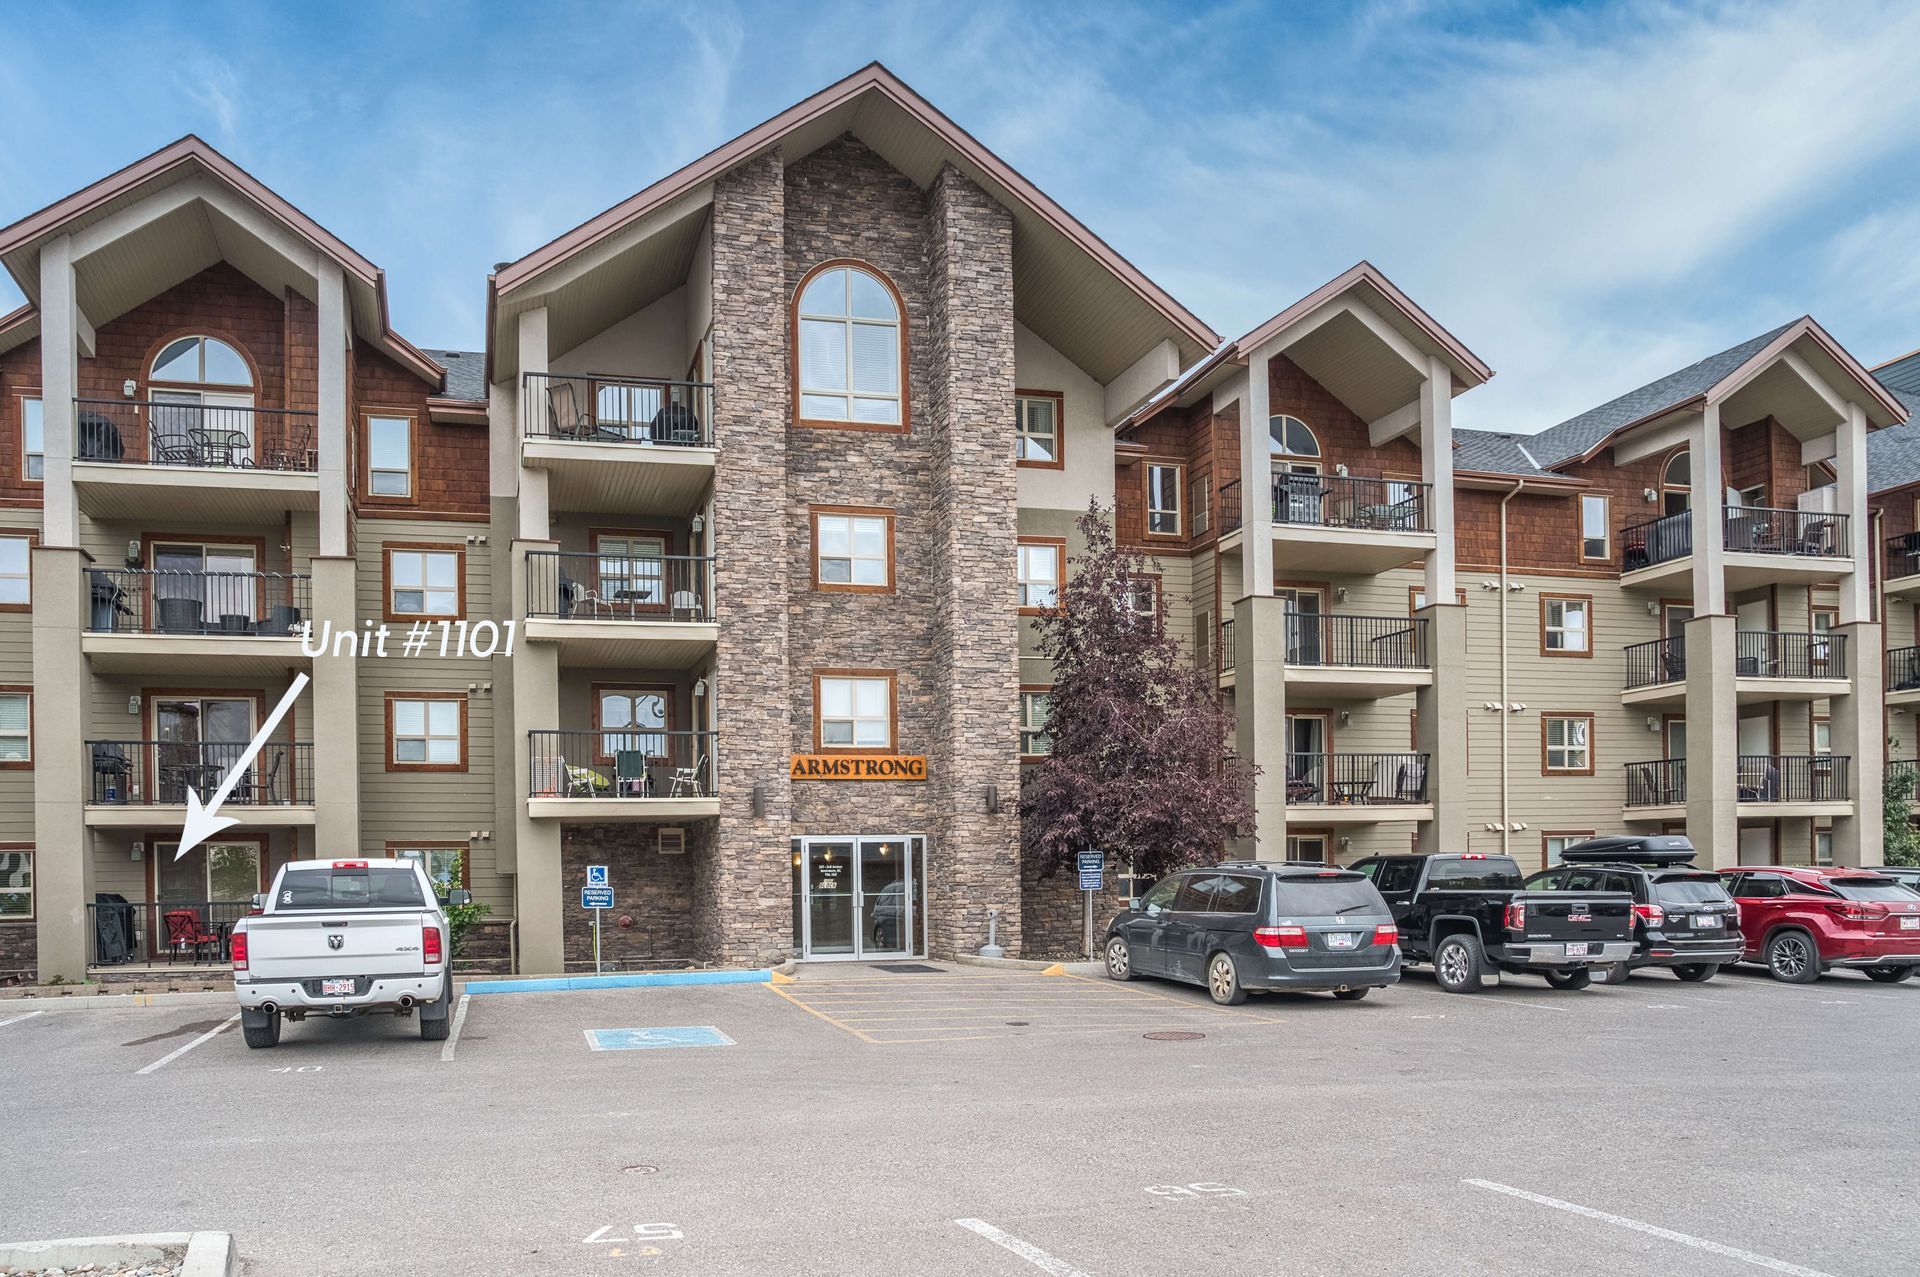 Armstrong building at the Lake Windermere Pointe Condos in Invermere, BC managed by Aisling Baile Property Management